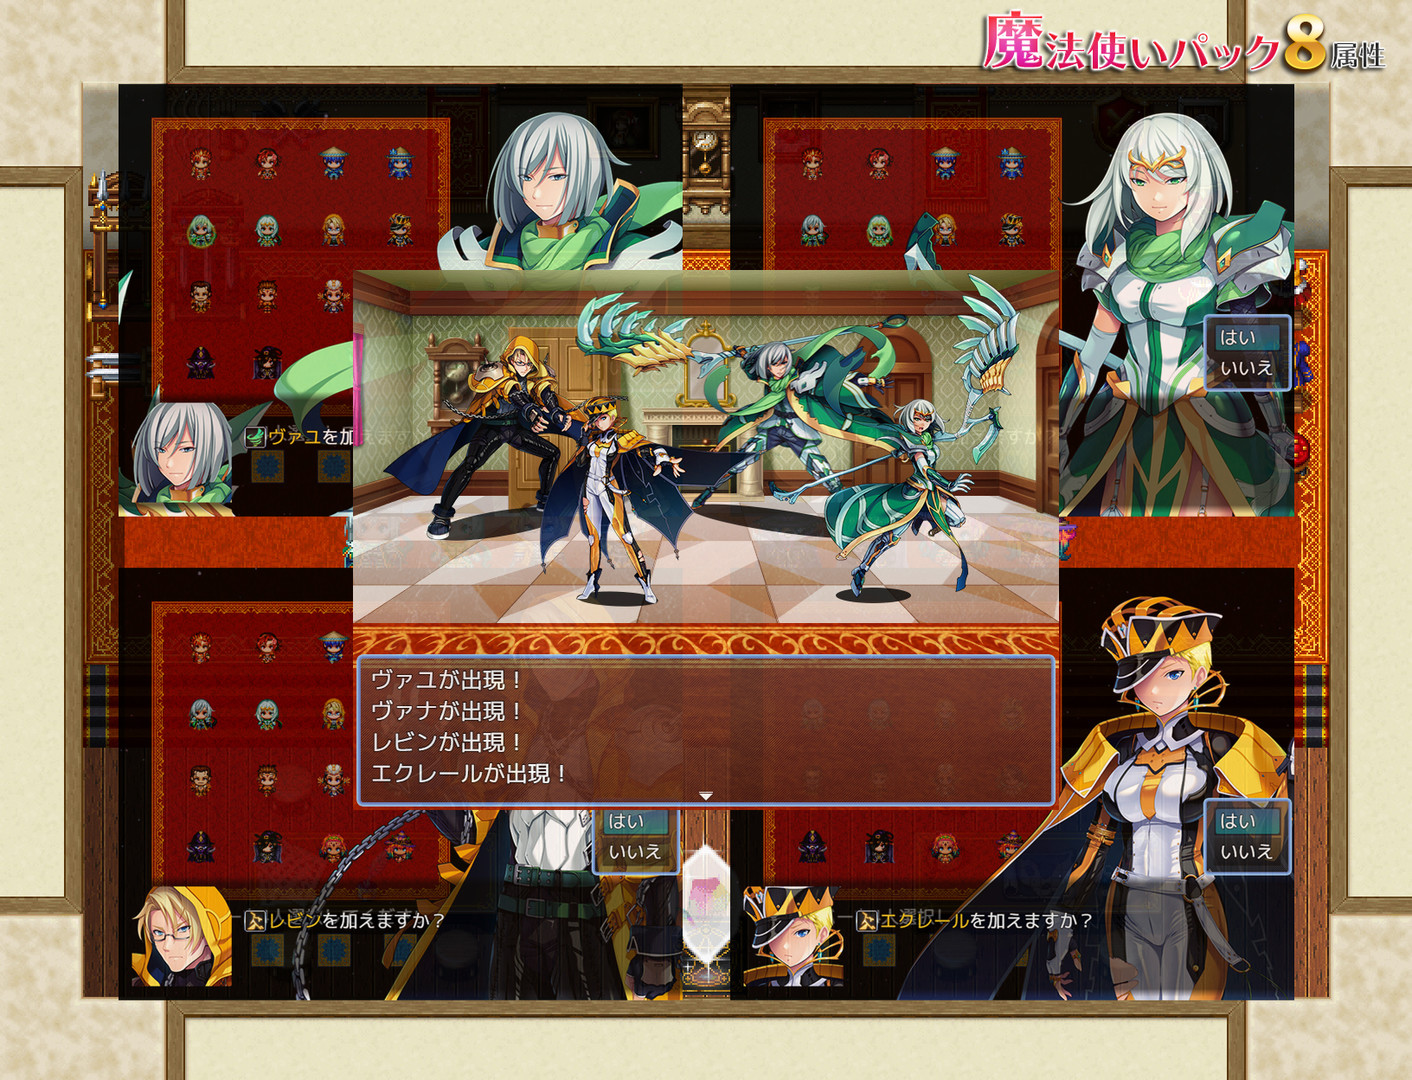 RPG Maker MZ - Wizards Pack (8 Elements)